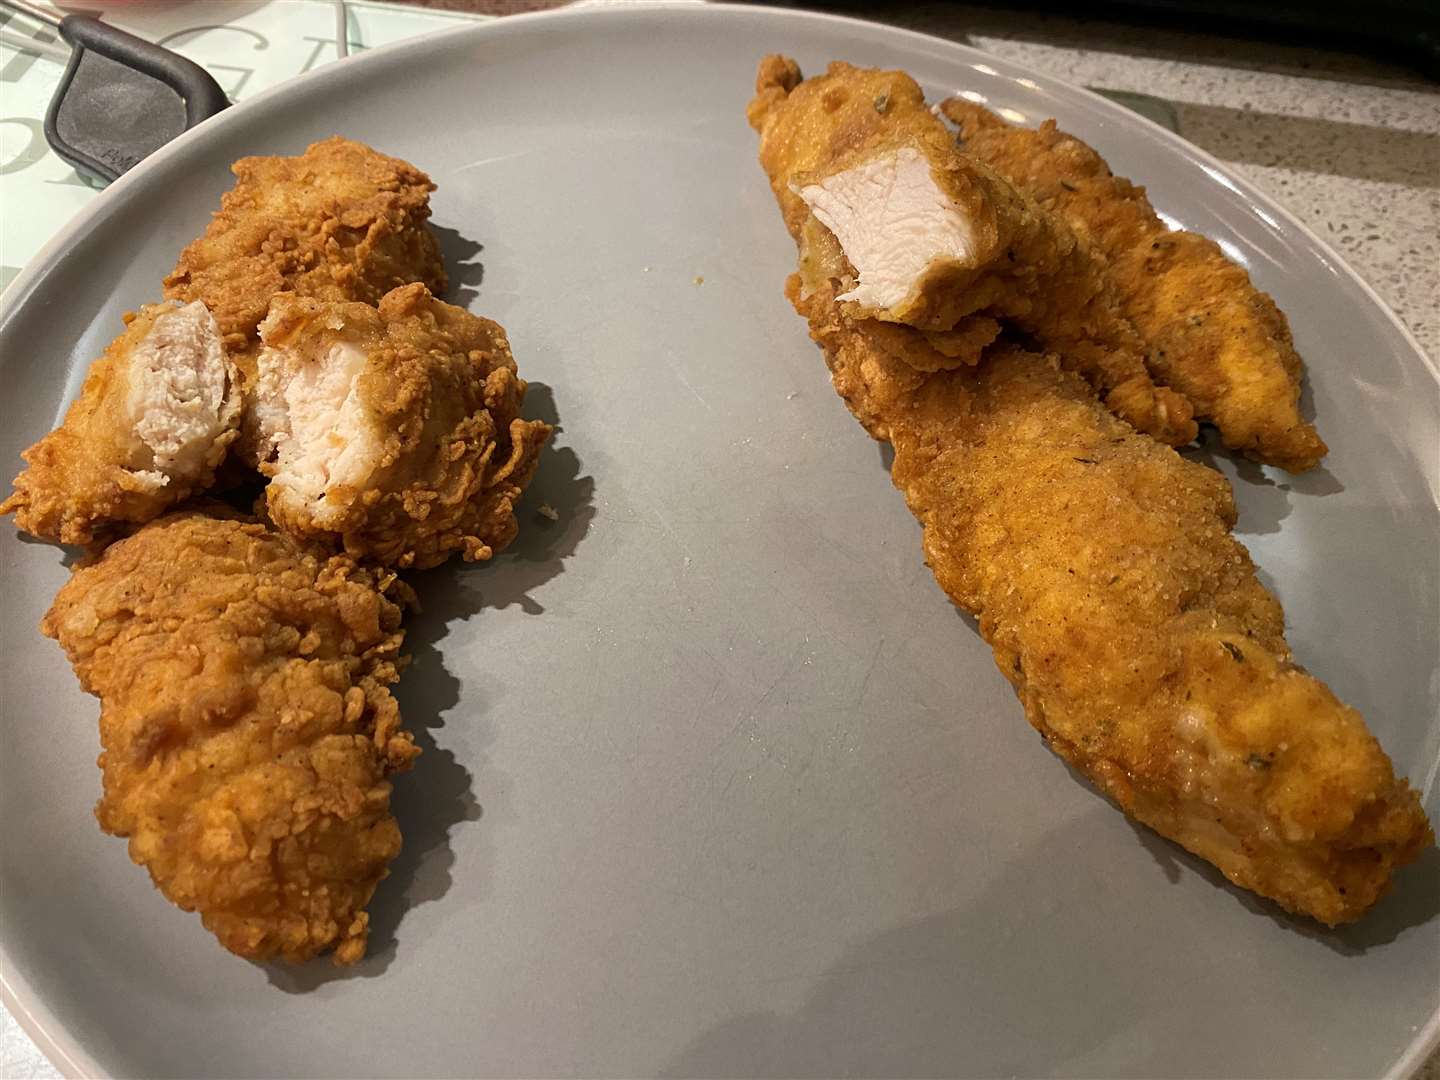 KFC’s chicken on the left, ‘Kayeffcee’ on the right